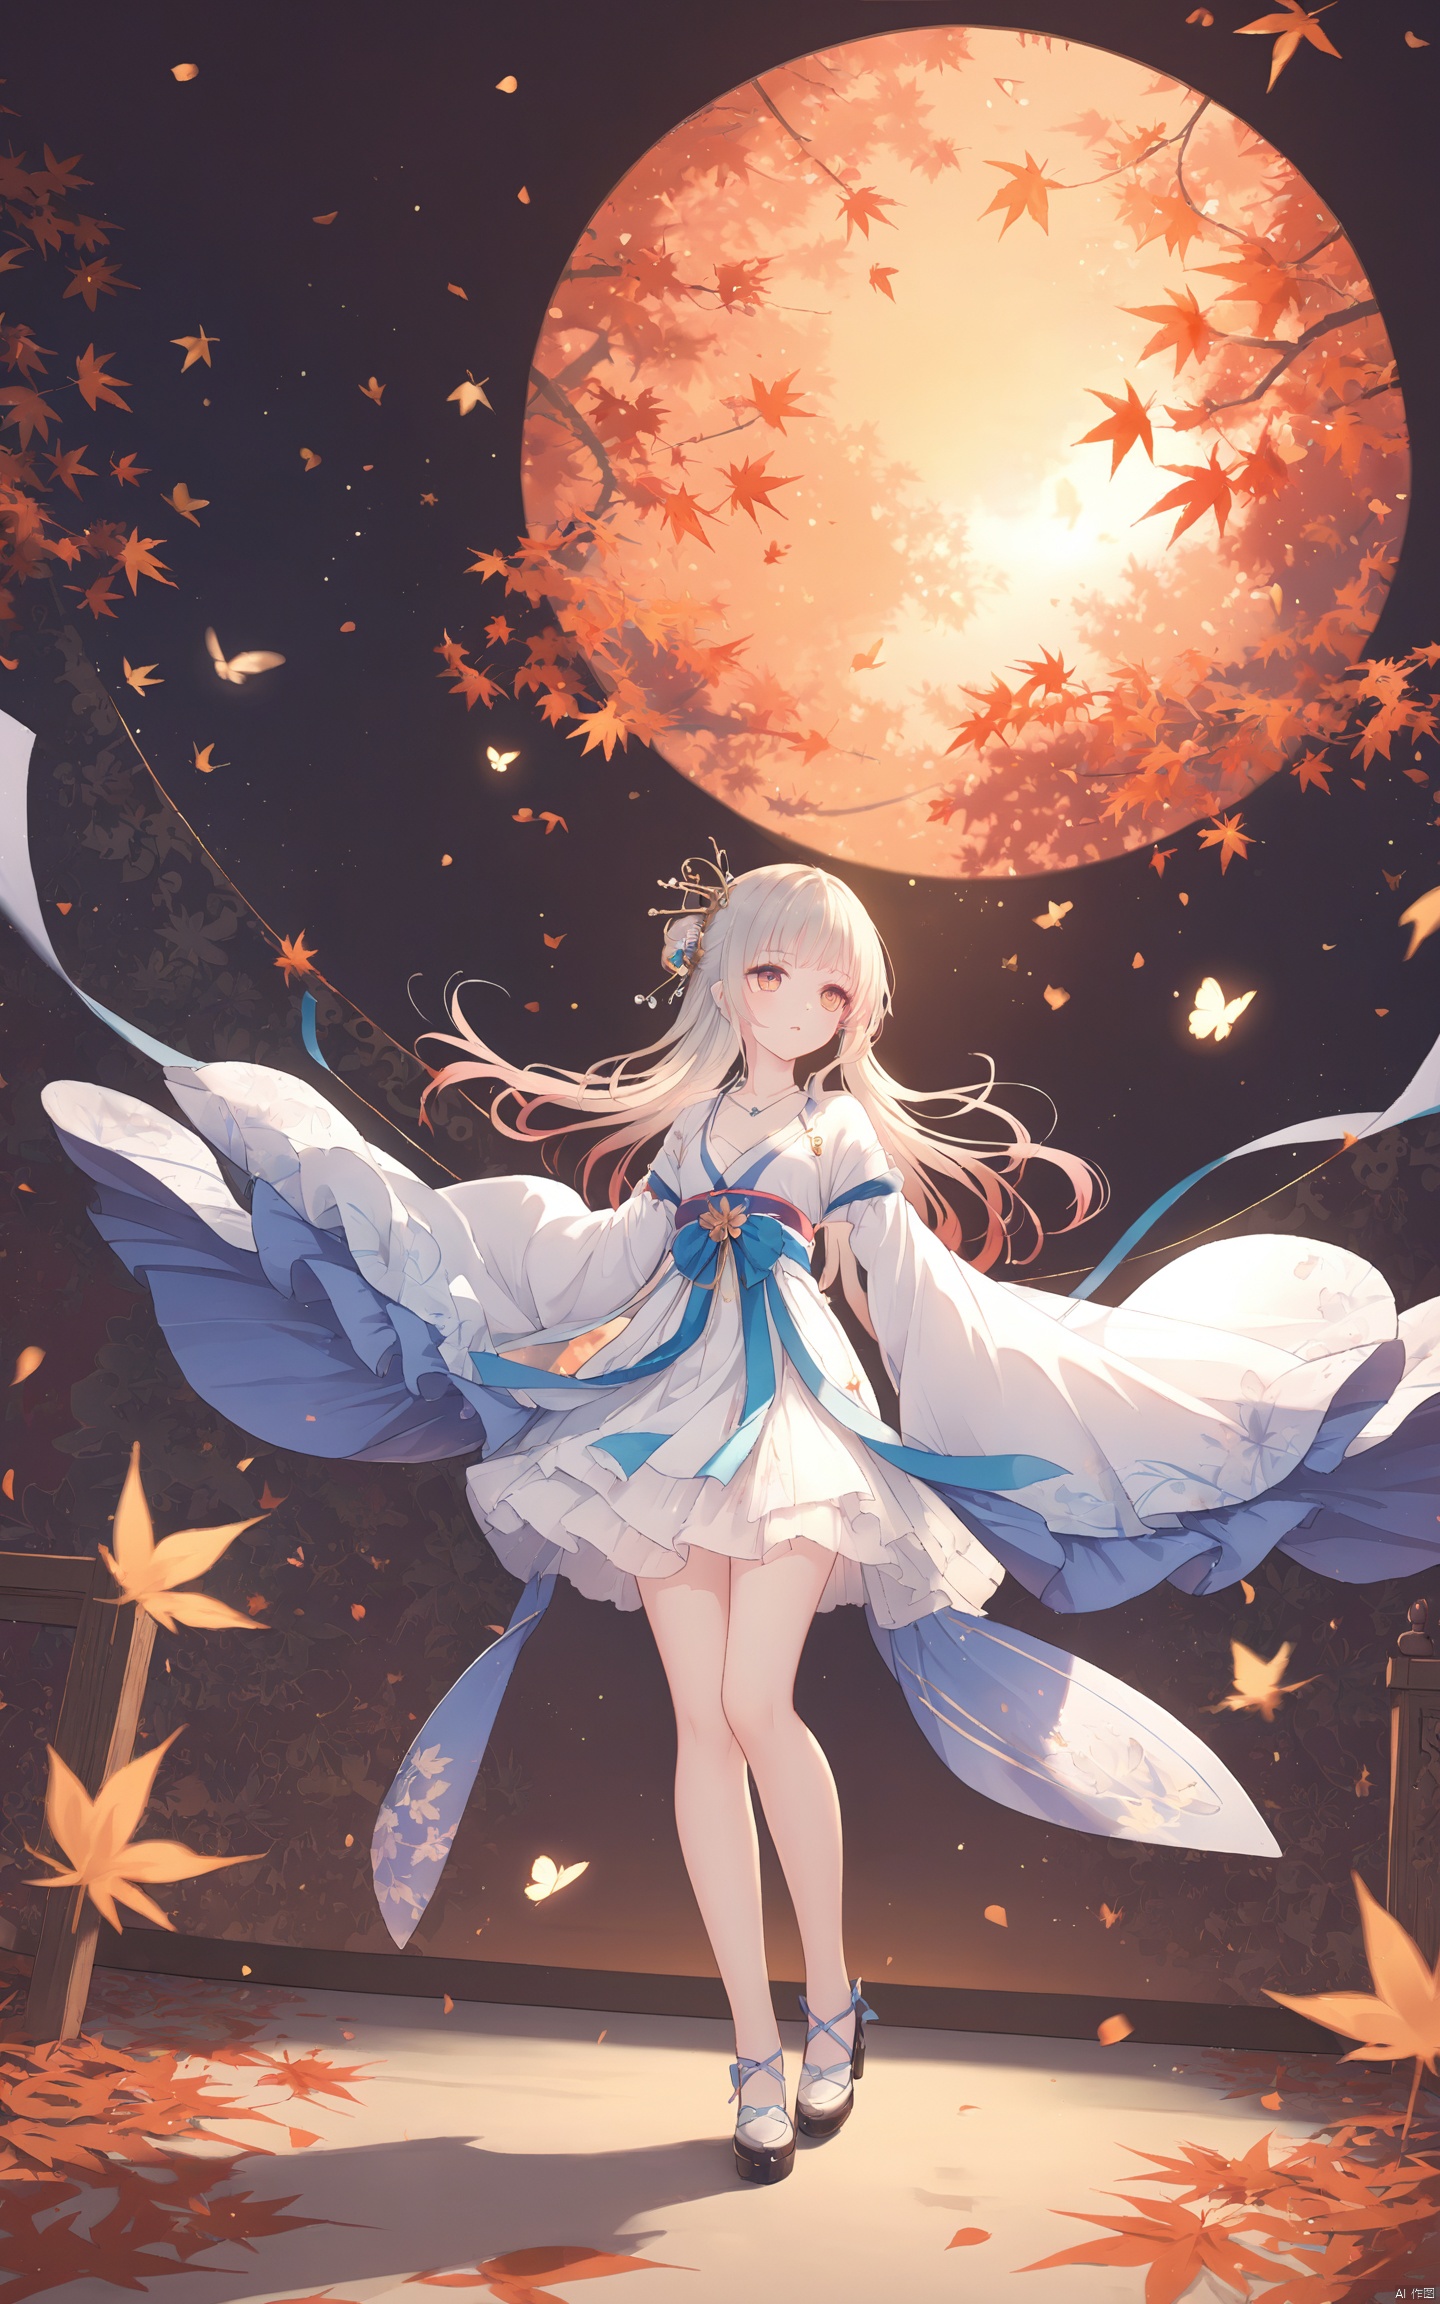 (Masterpiece), (Best Quality), Illustration, Ultra Detailed, HD, Depth of Field, (Color), Royal Sister, Full Body, Focus, Masterpiece, Solo, gradient_background, Autumn, Best Quality, Lantern, Light and Shadow Through the Dappled Leaves, Late Night, Wind, Flying Butterfly, Flying Petals, Maple Tree, Falling Maple Leaves, Orange Moon, 1 Girl, Beautiful Detailed Eyes, Small Breasts, Colorful Eyes, Beautiful Details, Hanfu Anime Style, White gradient hair blue highlight, hairpin, hime_cut, sleeves over wrists, sleeves over fingers, sigh, strong rim light, anime screenshots, bust, single focus, extremely detailed wallpaper, characters as main perspective, strong shadows, cinematic lighting, depth of field, painting